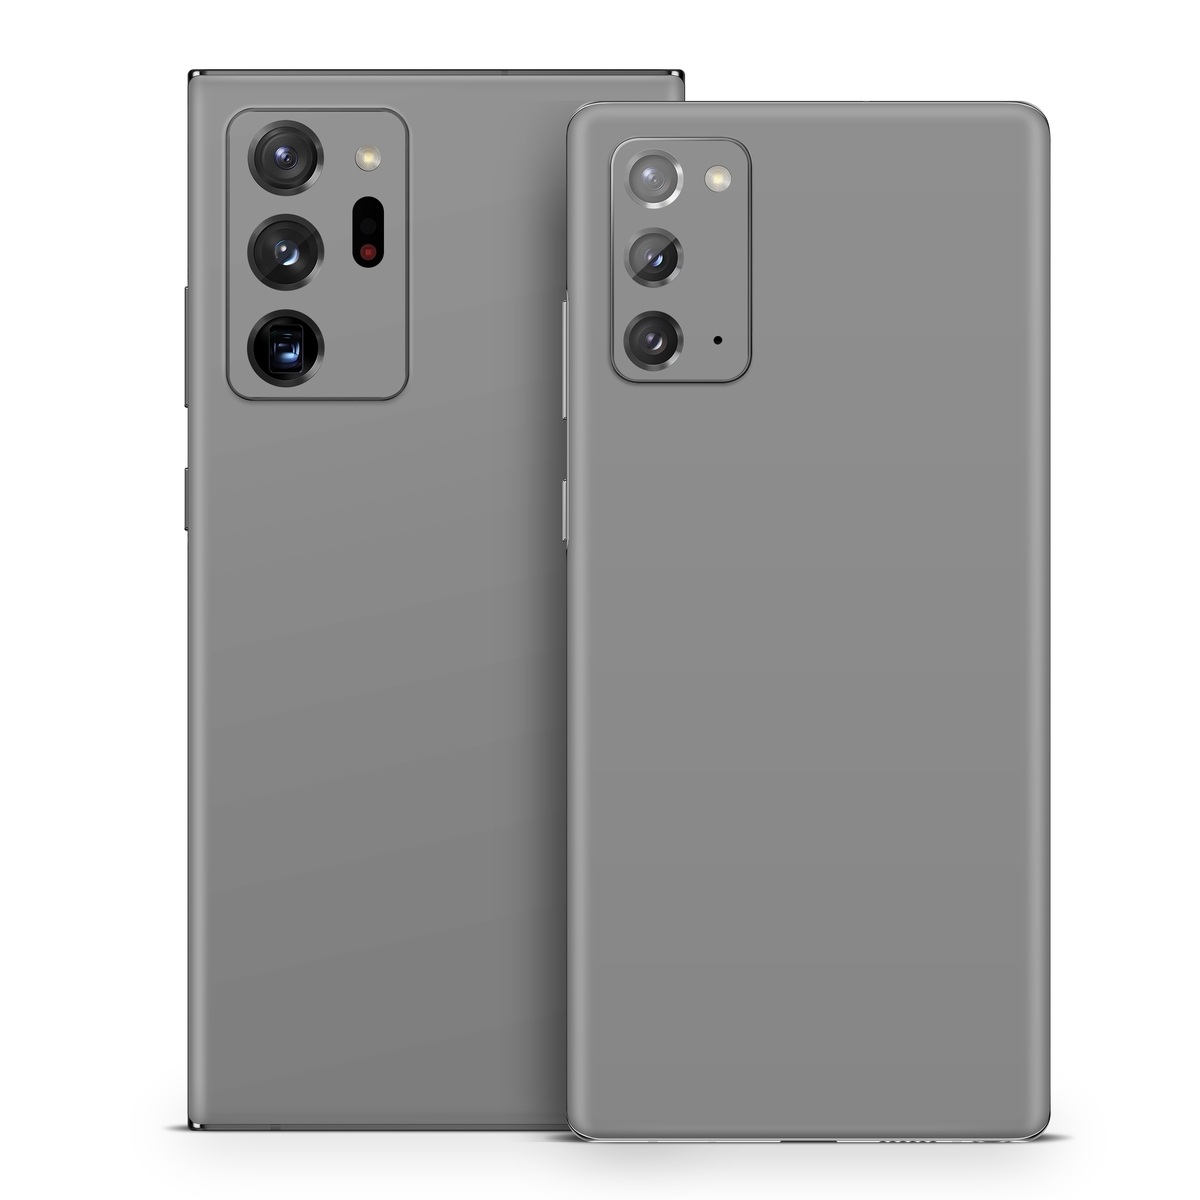 Samsung Galaxy Note 20 Series Skin design of Atmospheric phenomenon, Daytime, Grey, Brown, Sky, Calm, Atmosphere, Beige, with gray colors